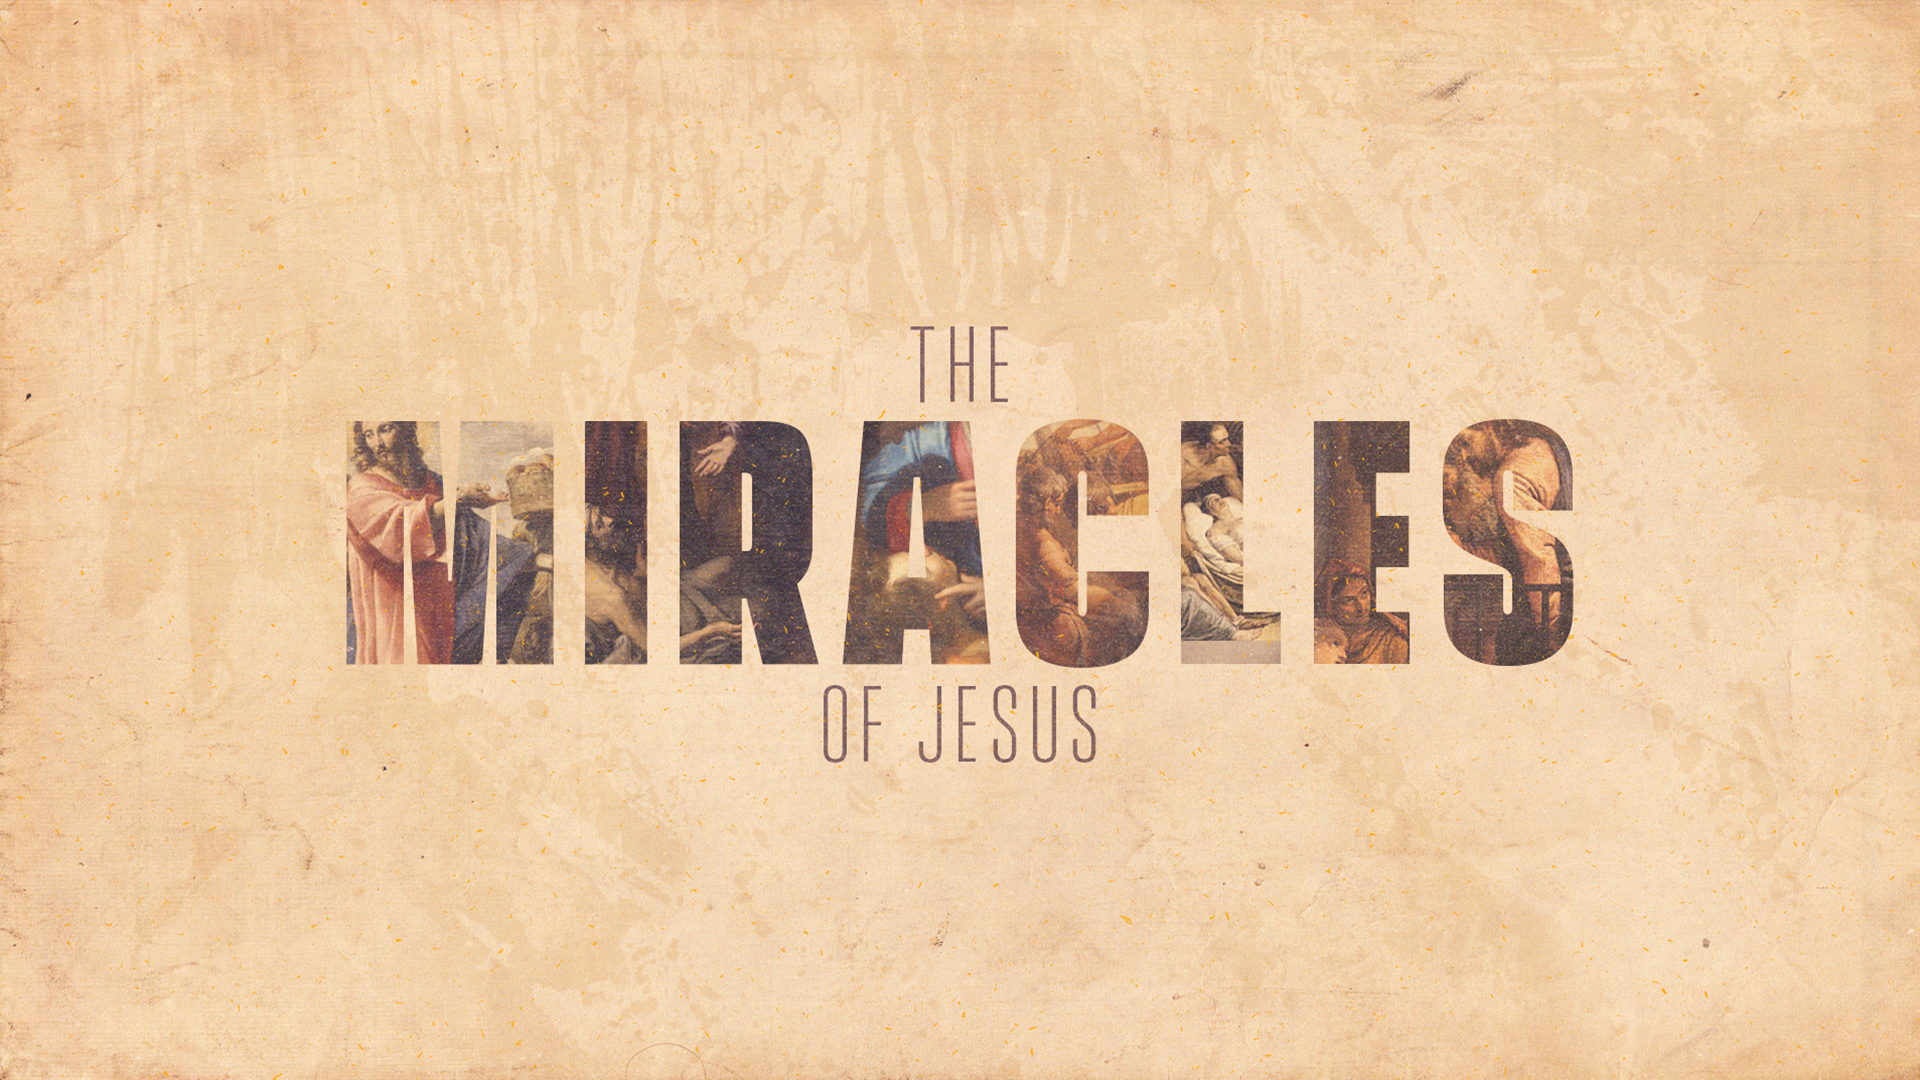 The Miracles of Jesus Message Series